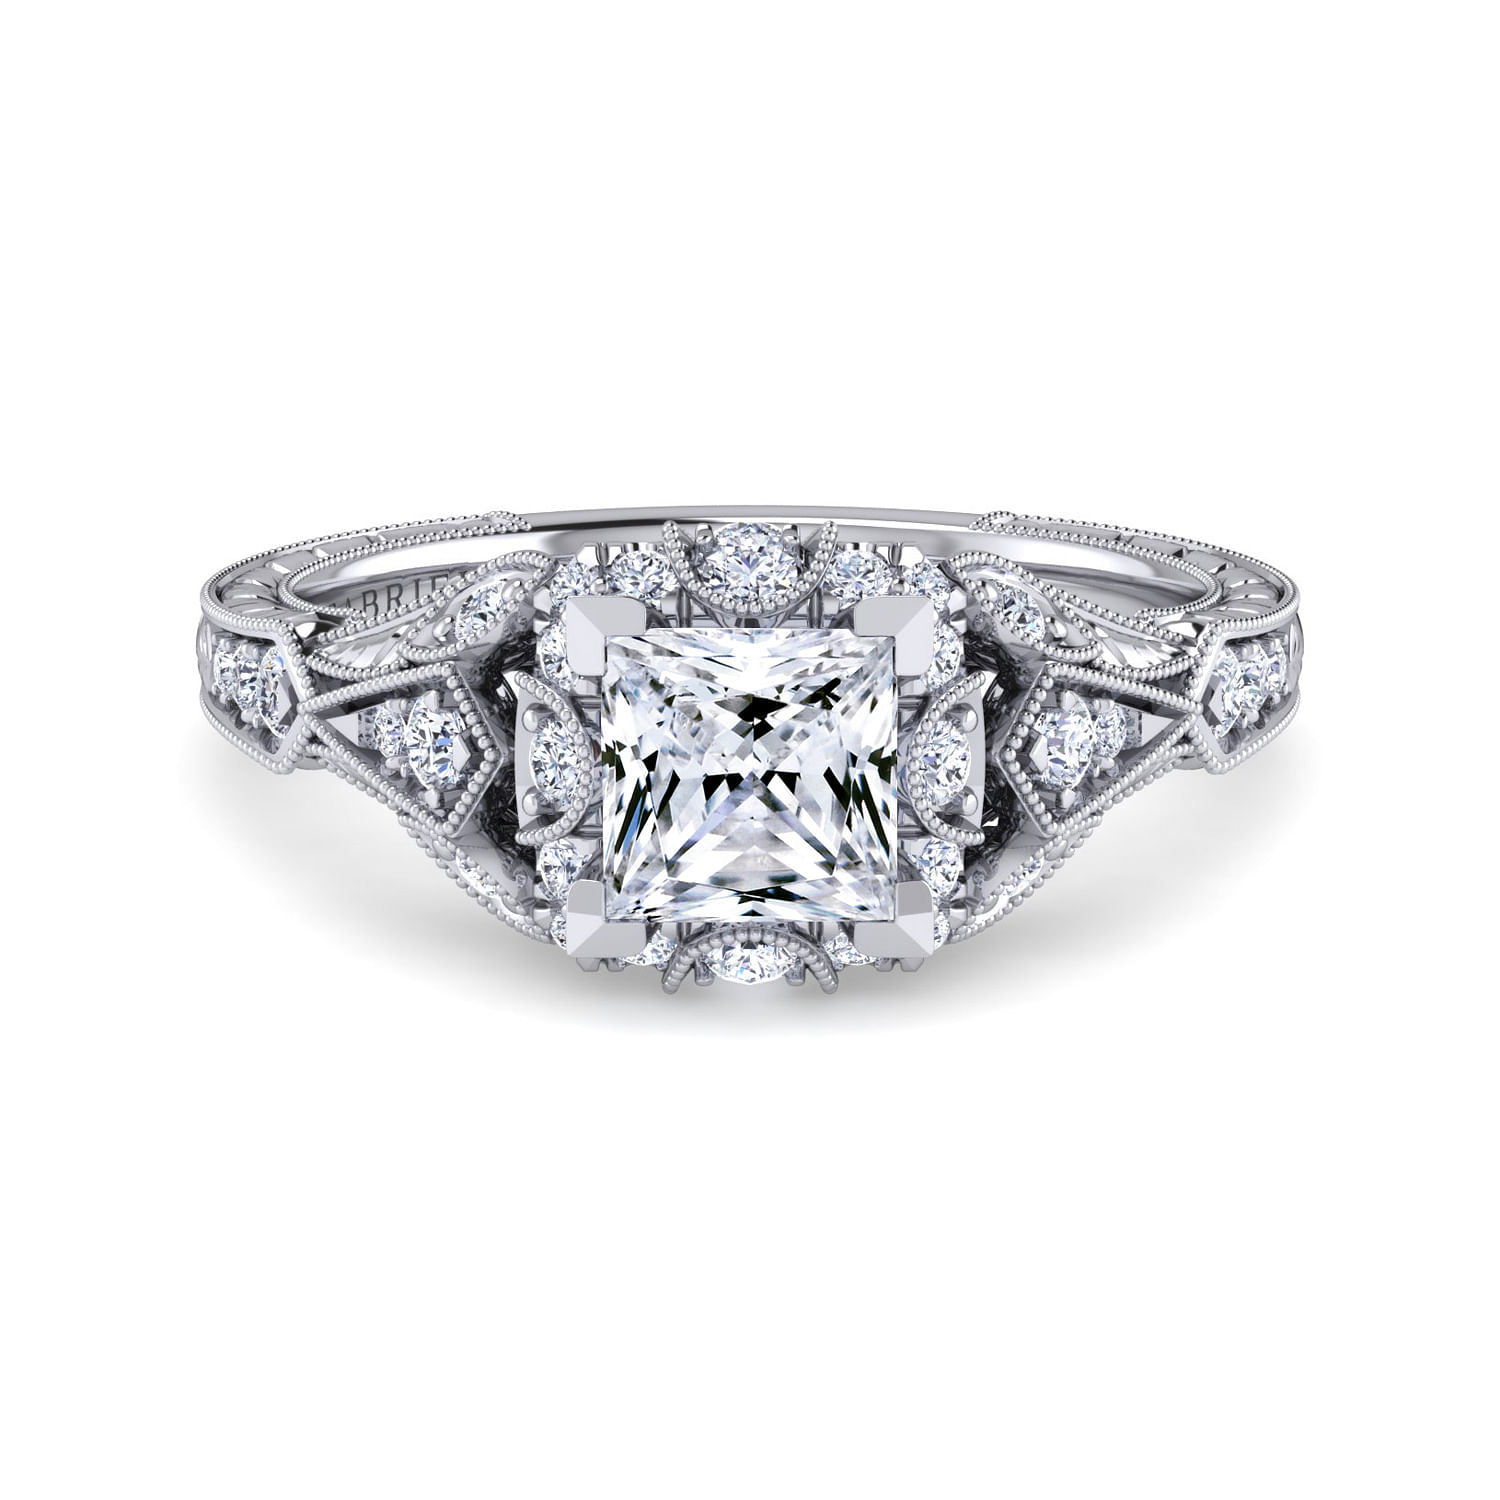 Annadale - Unique 14K White Gold Vintage Inspired Princess Cut Diamond Halo Engagement Ring